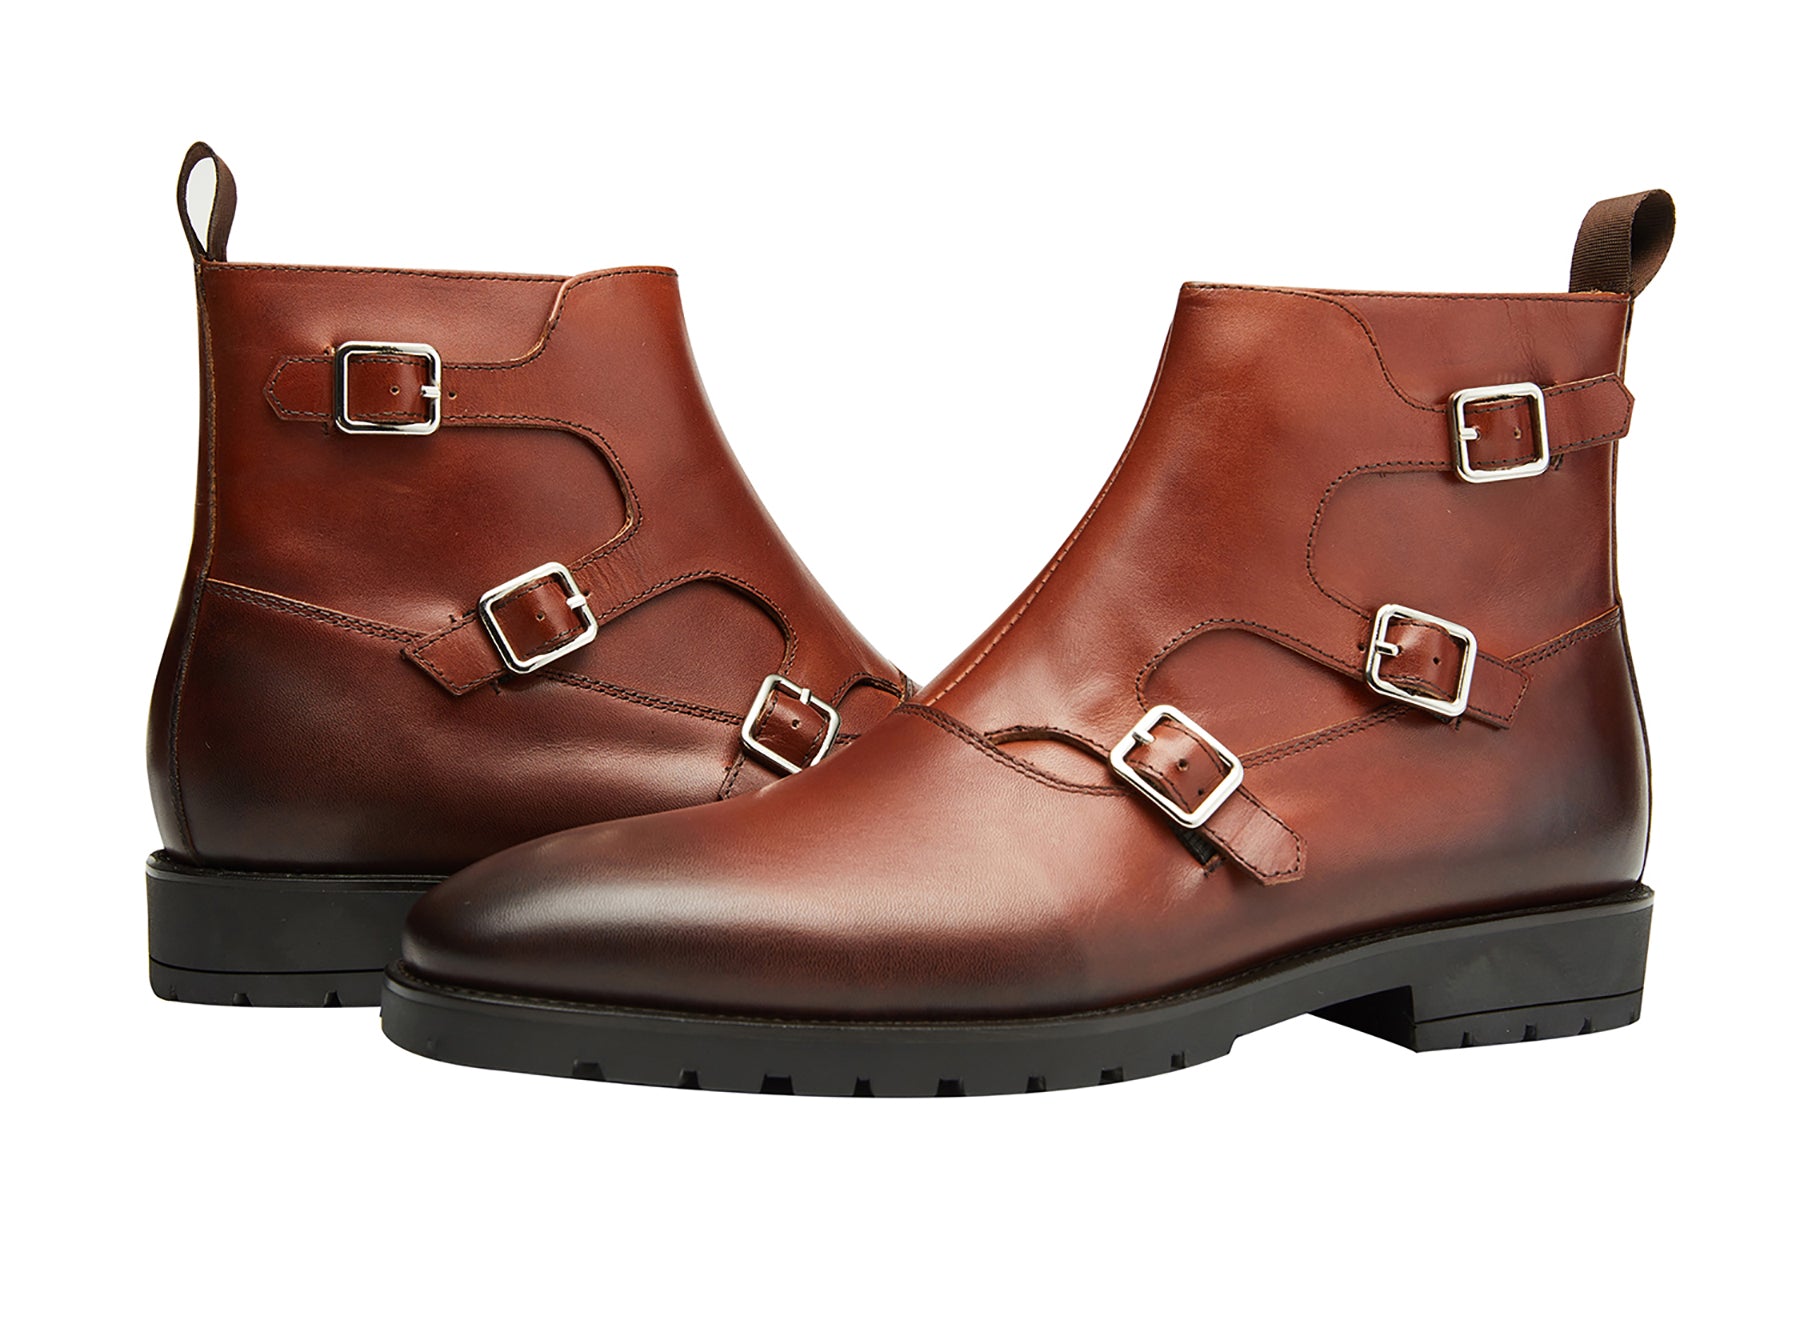 Men's Buckle Monk Strap Leather Western Boots